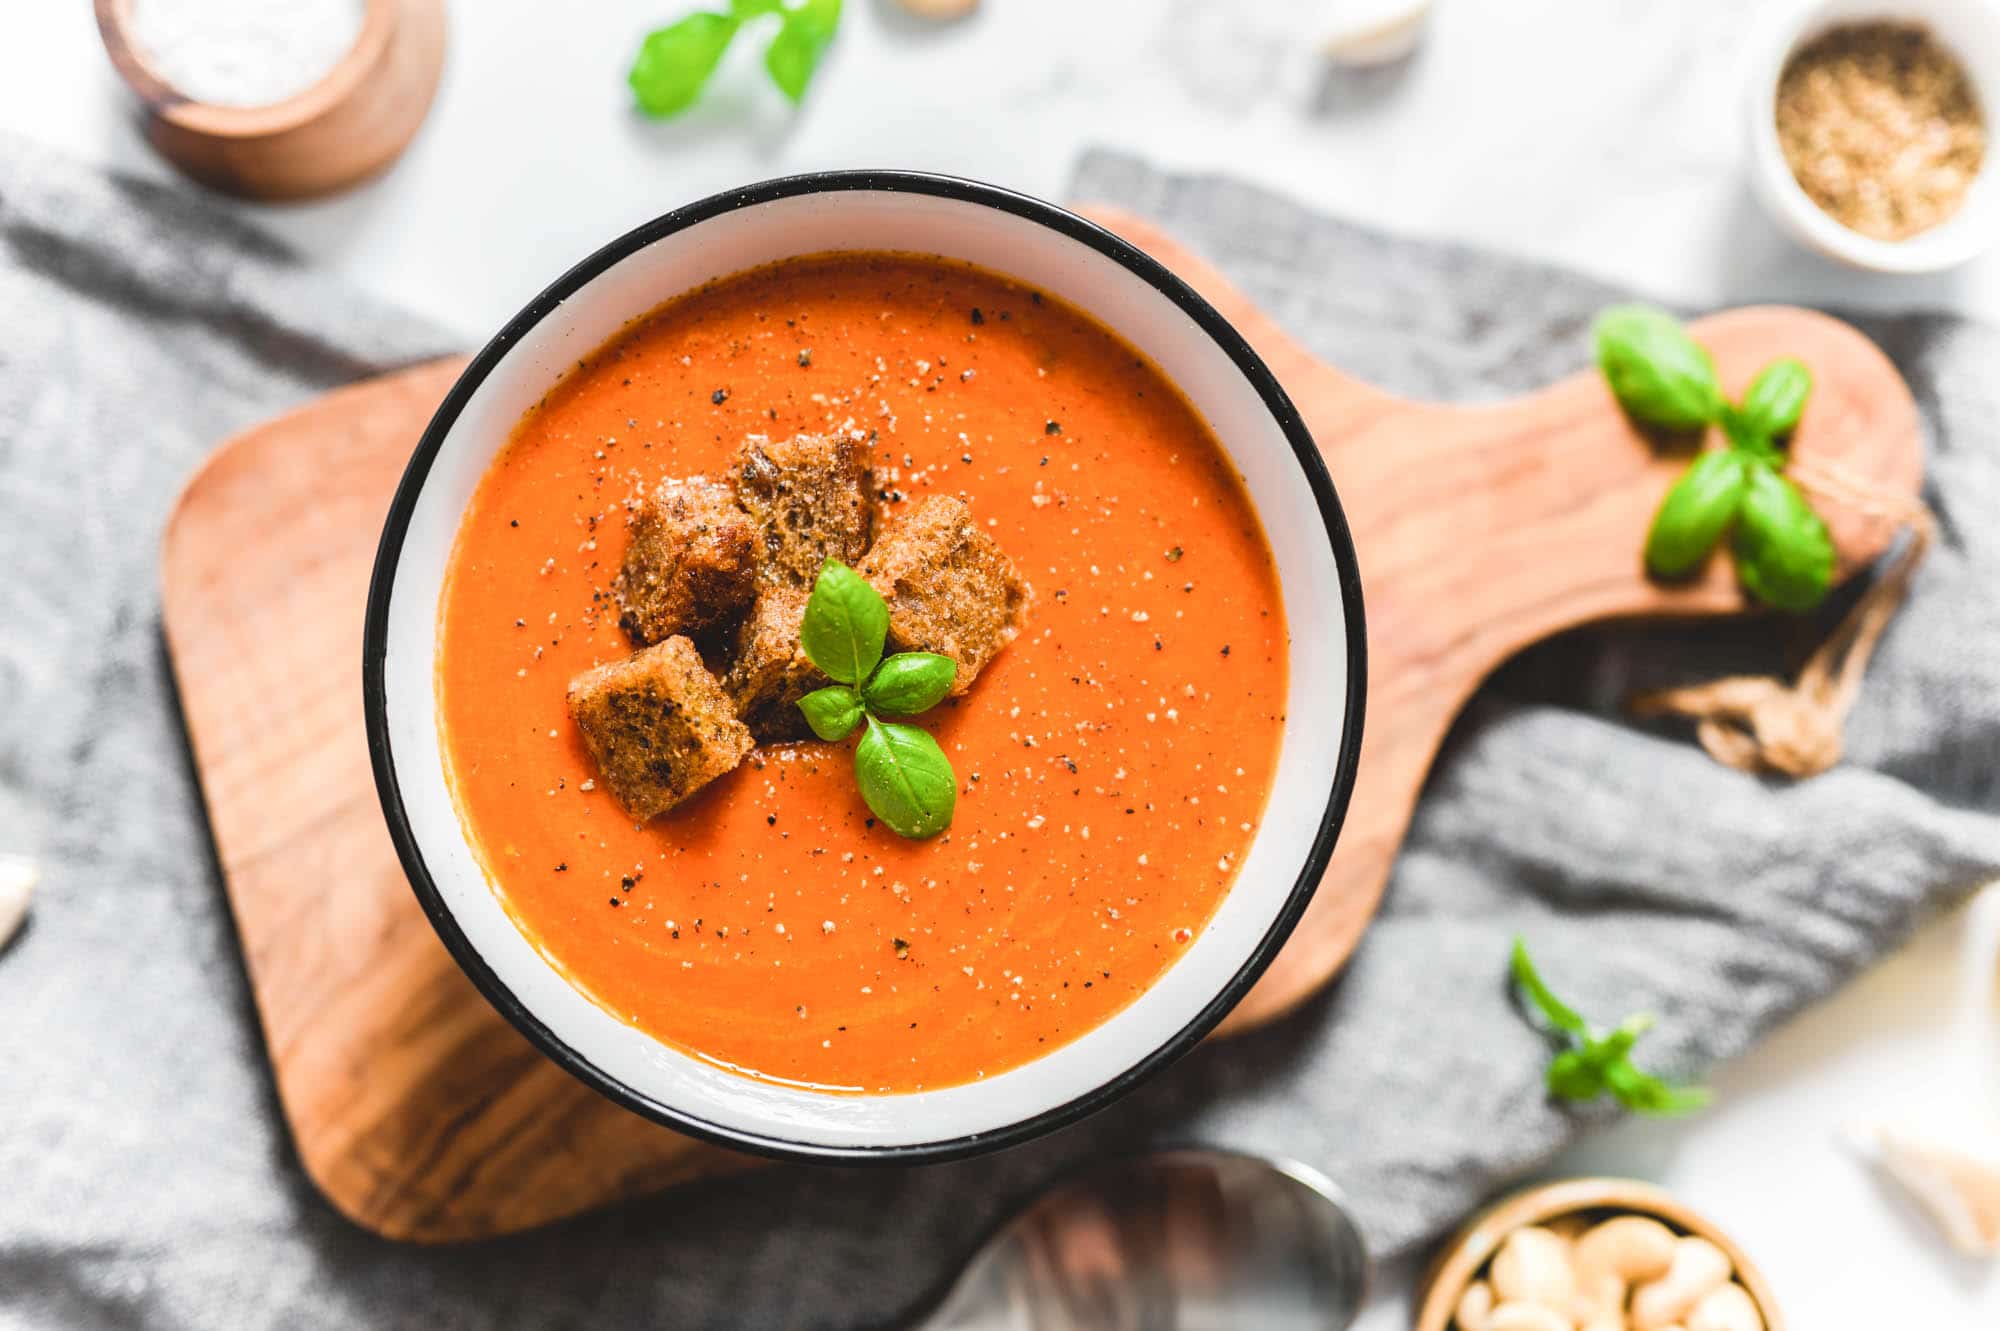 Creamy Tomato Soup From Canned Tomatoes